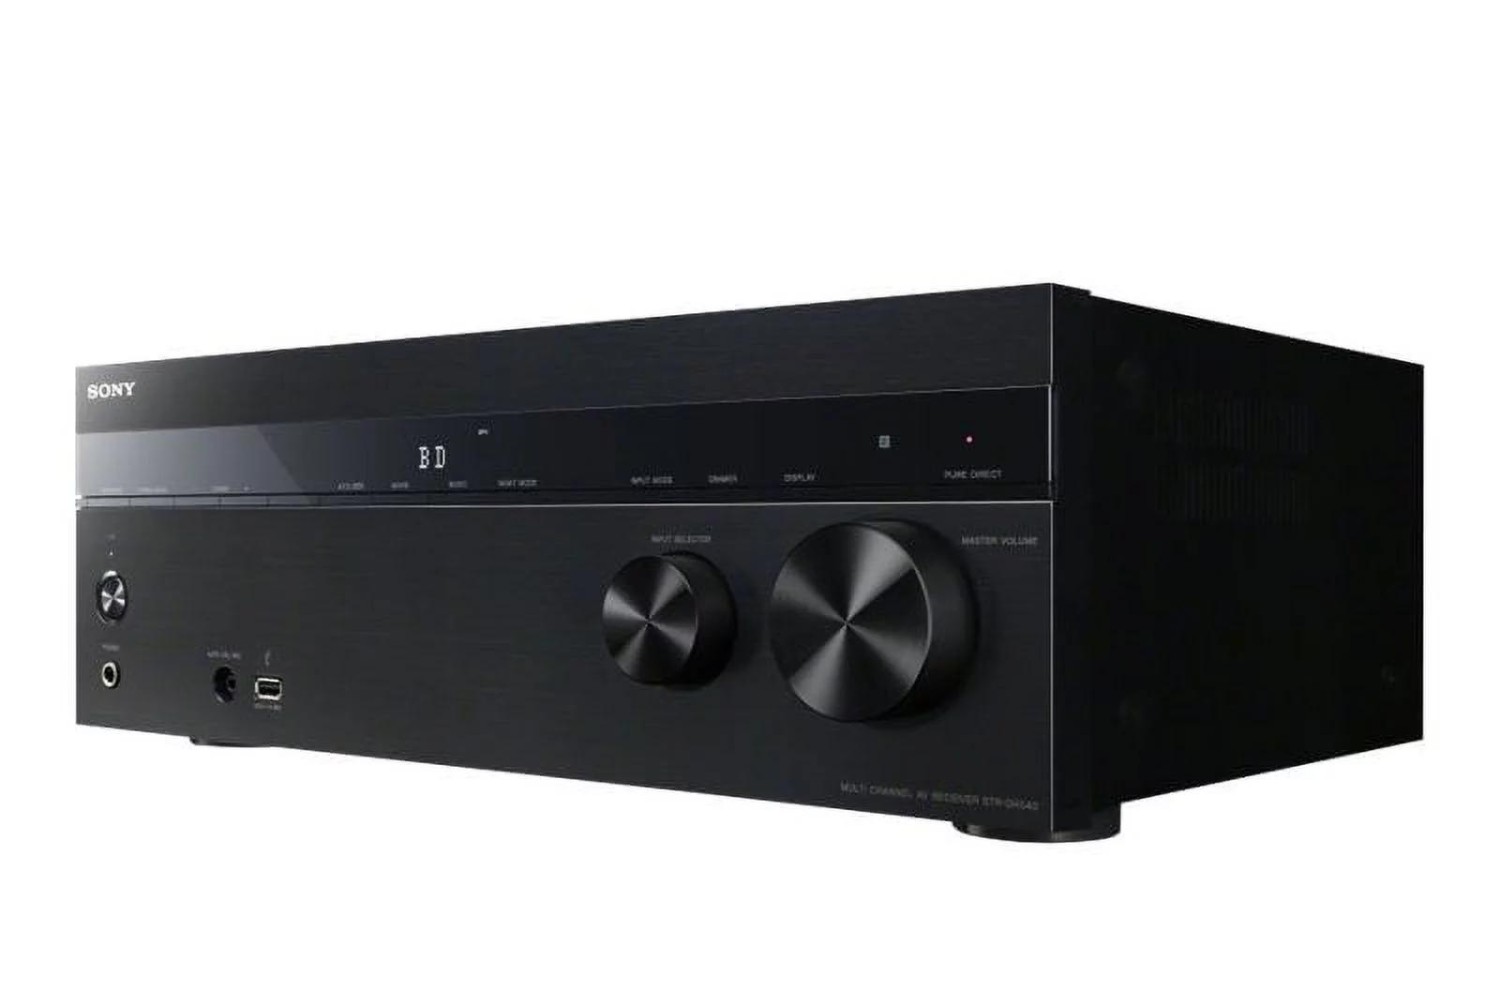 How To Hook Up Bose Acoustimass 3 Series V And A Sony STR-DH540 5.2 AV Receiver